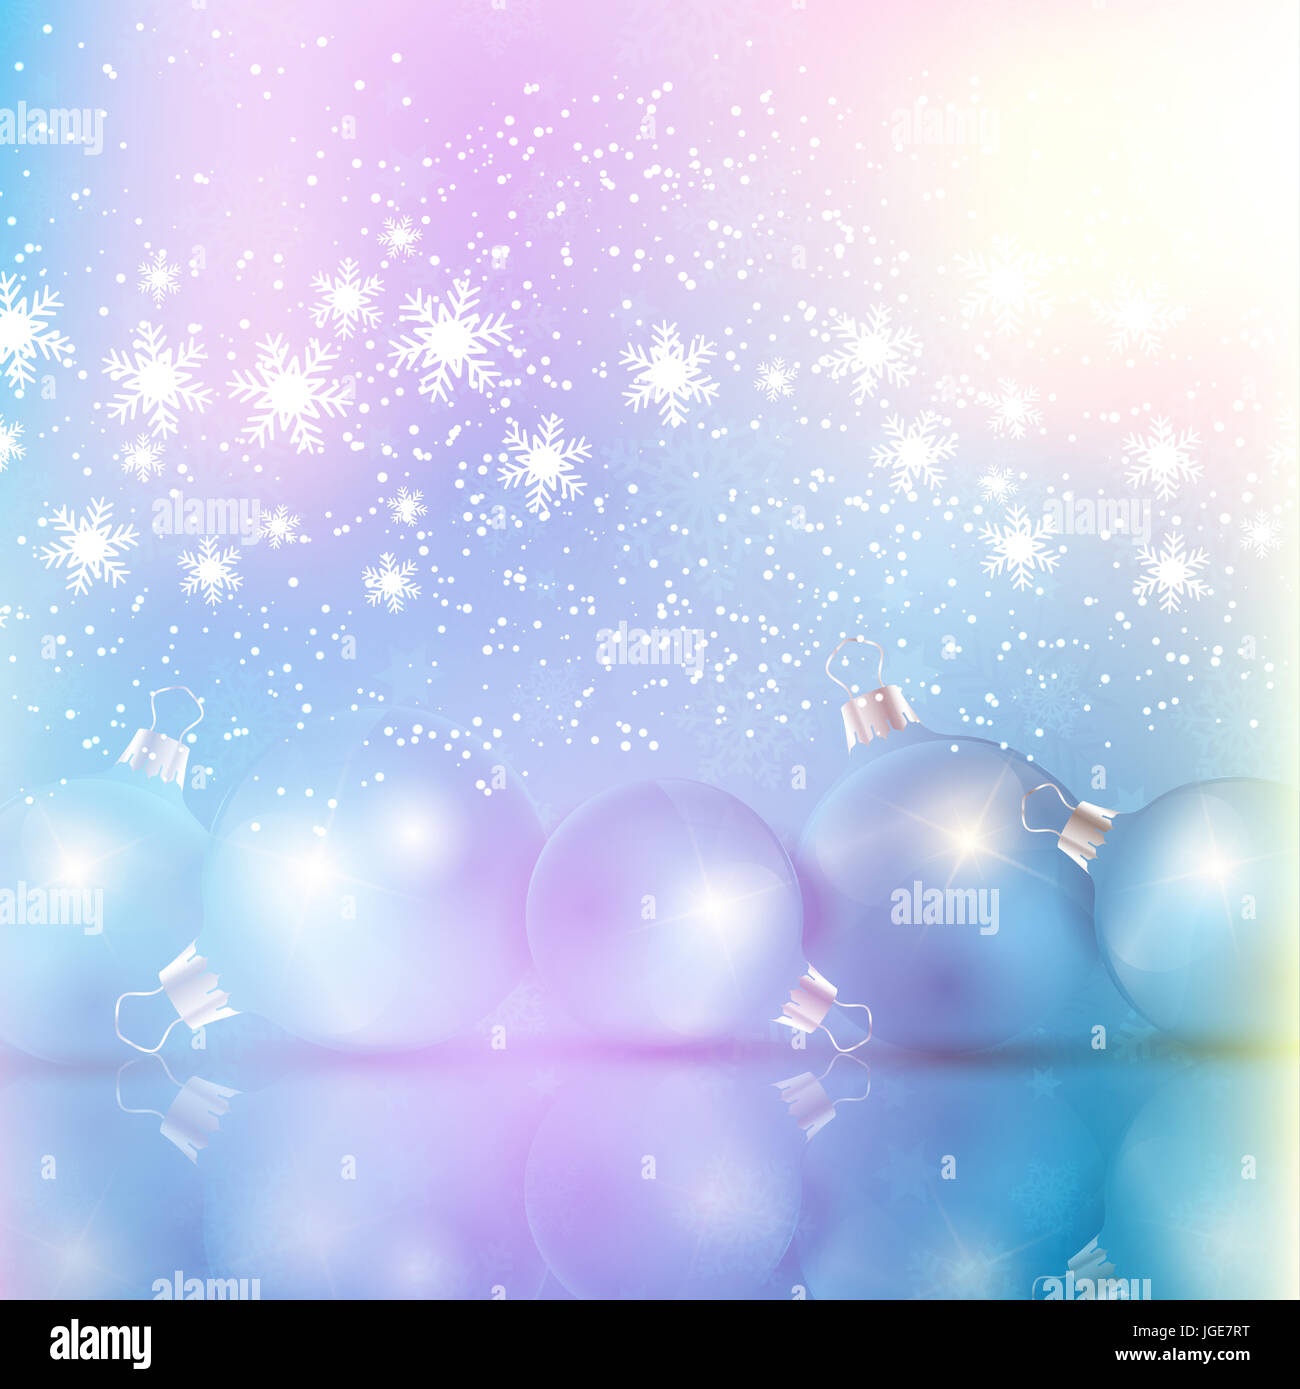 Christmas bauble background with a retro effect Stock Photo